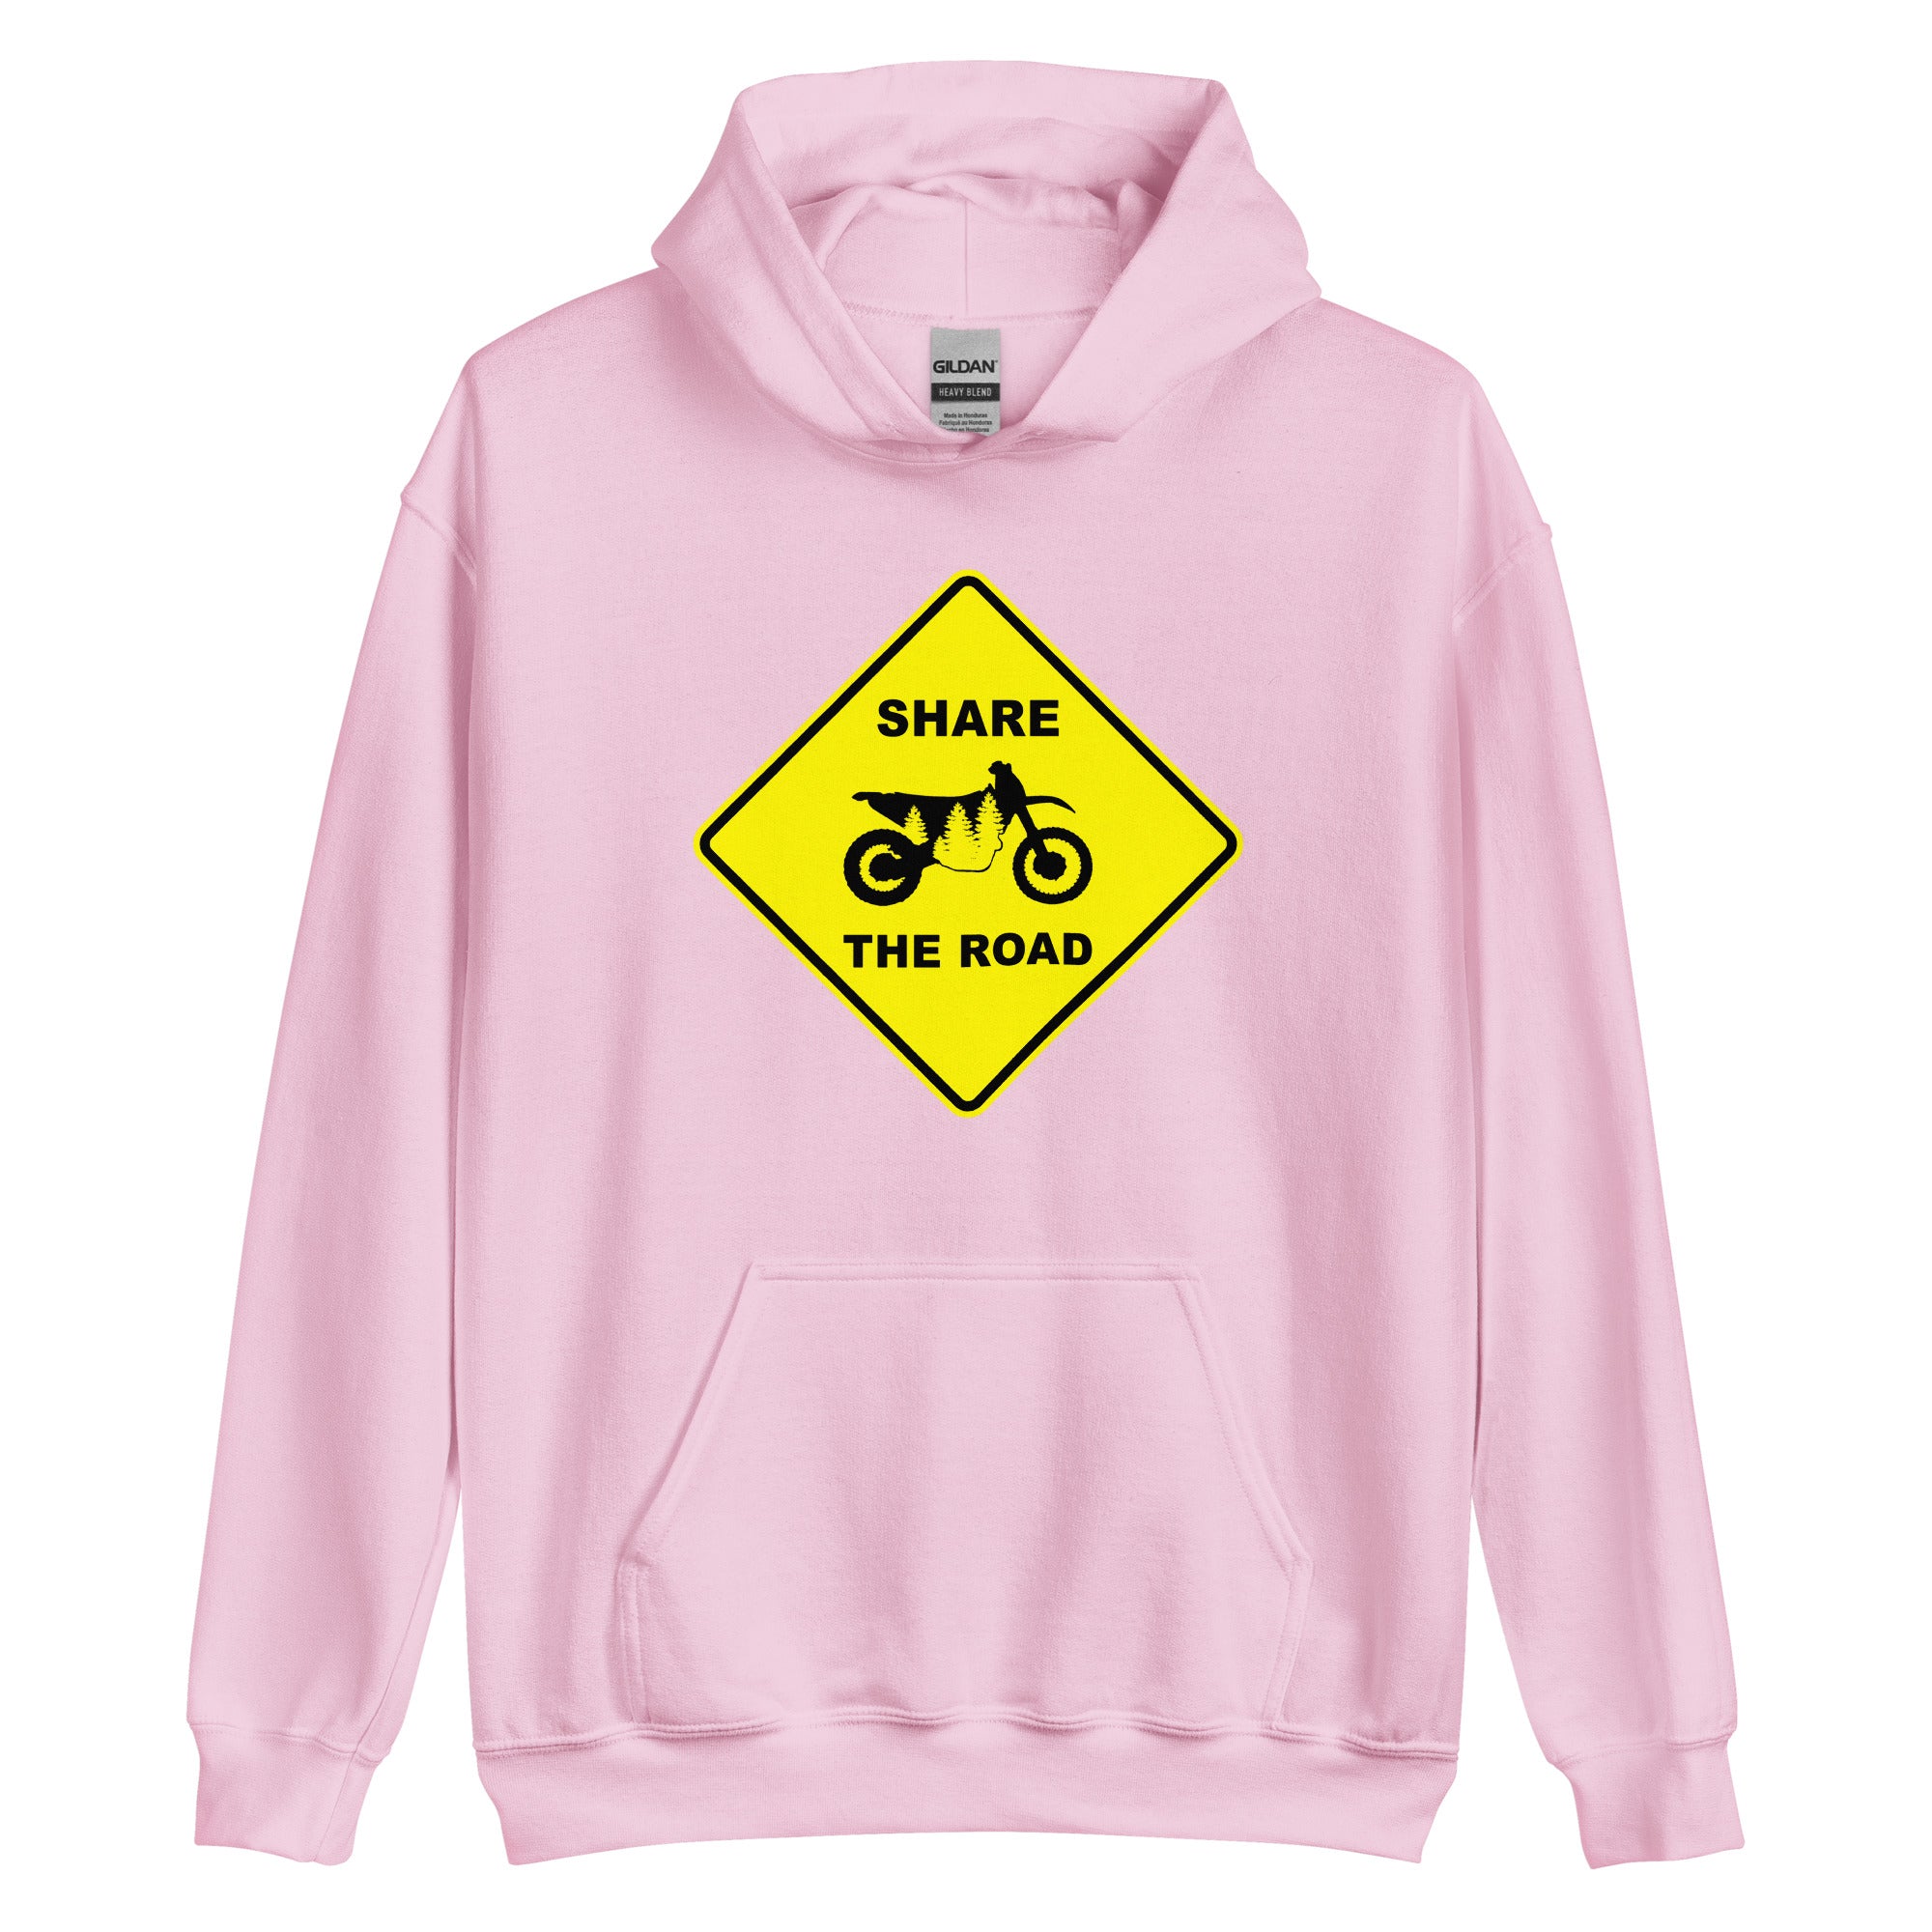 Share The Road Hoodie, Classic